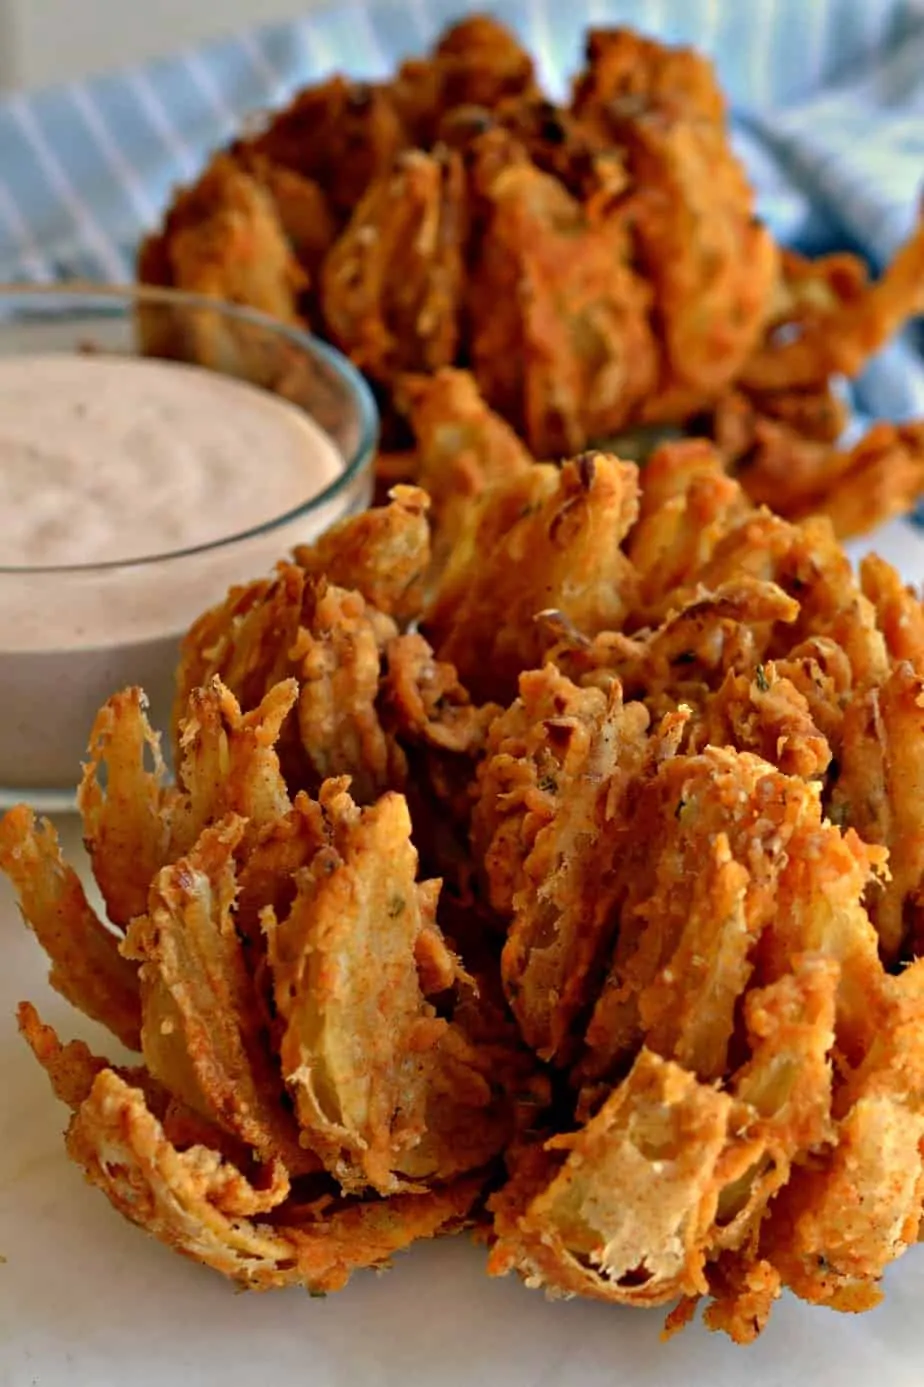 Better than Outbacks these Blooming Onions are super simple to make.